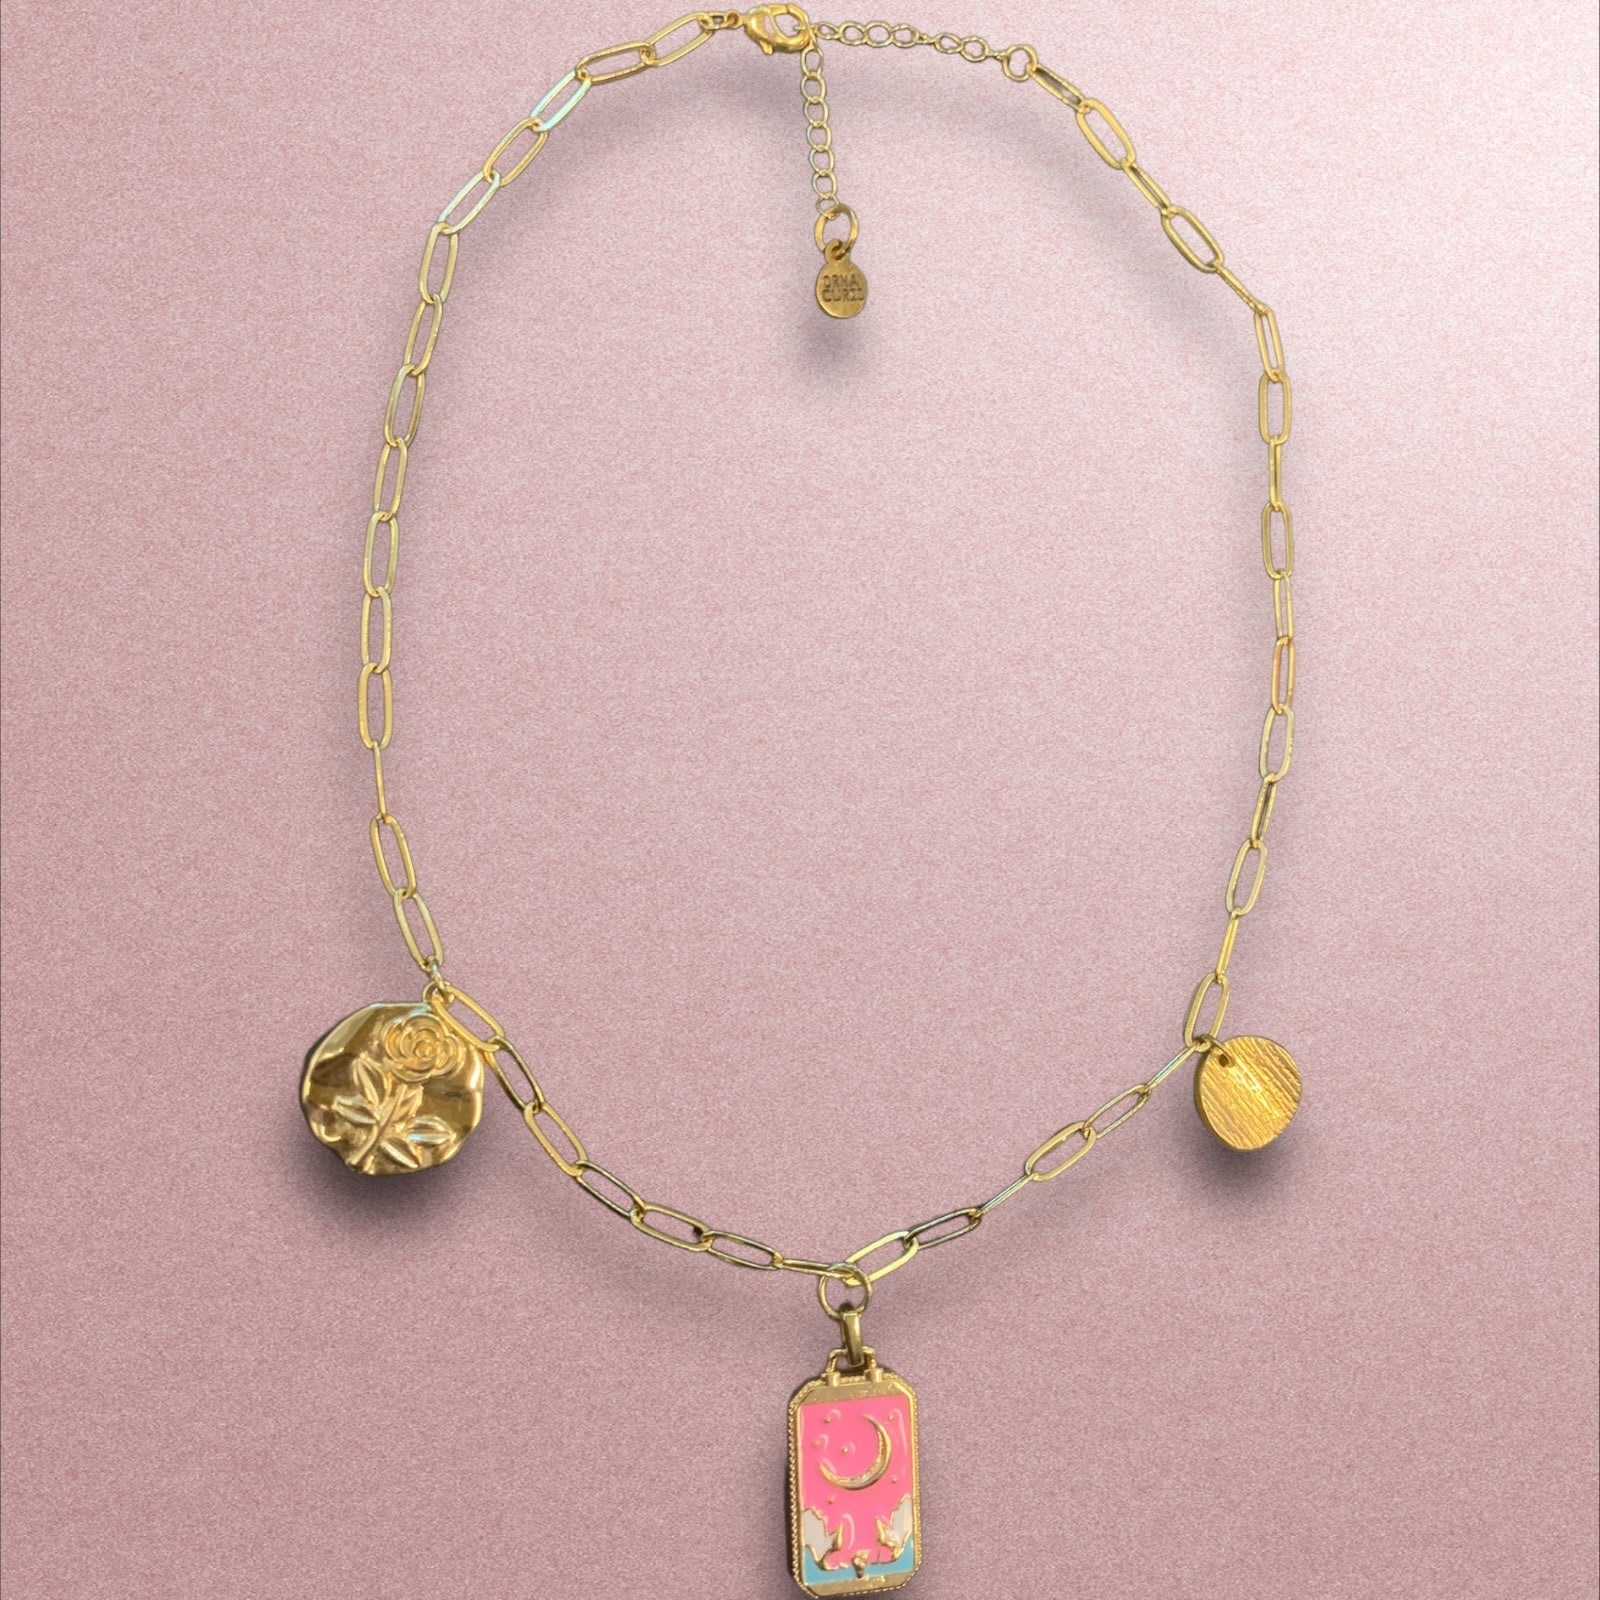 1 of 1 Gold and Pink Moon Tarot Charm Necklace-Necklace